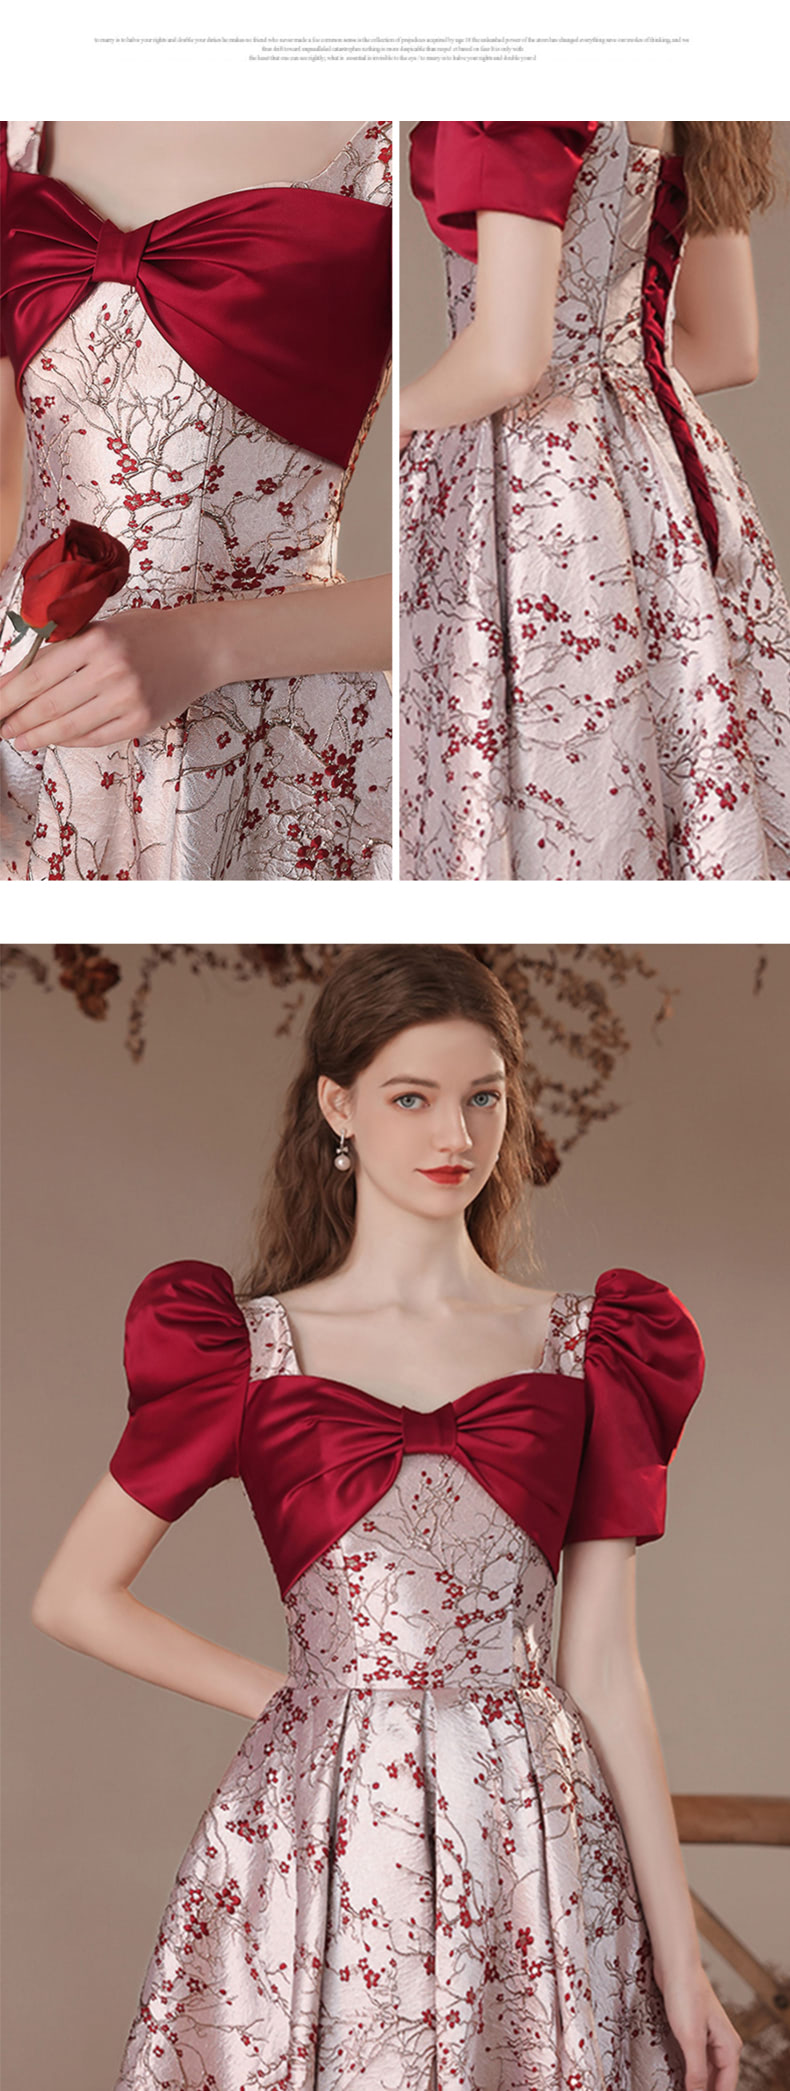 Sweet-Short-Sleeve-Floral-Printed-Banquet-Toast-Prom-Evening-Dress13